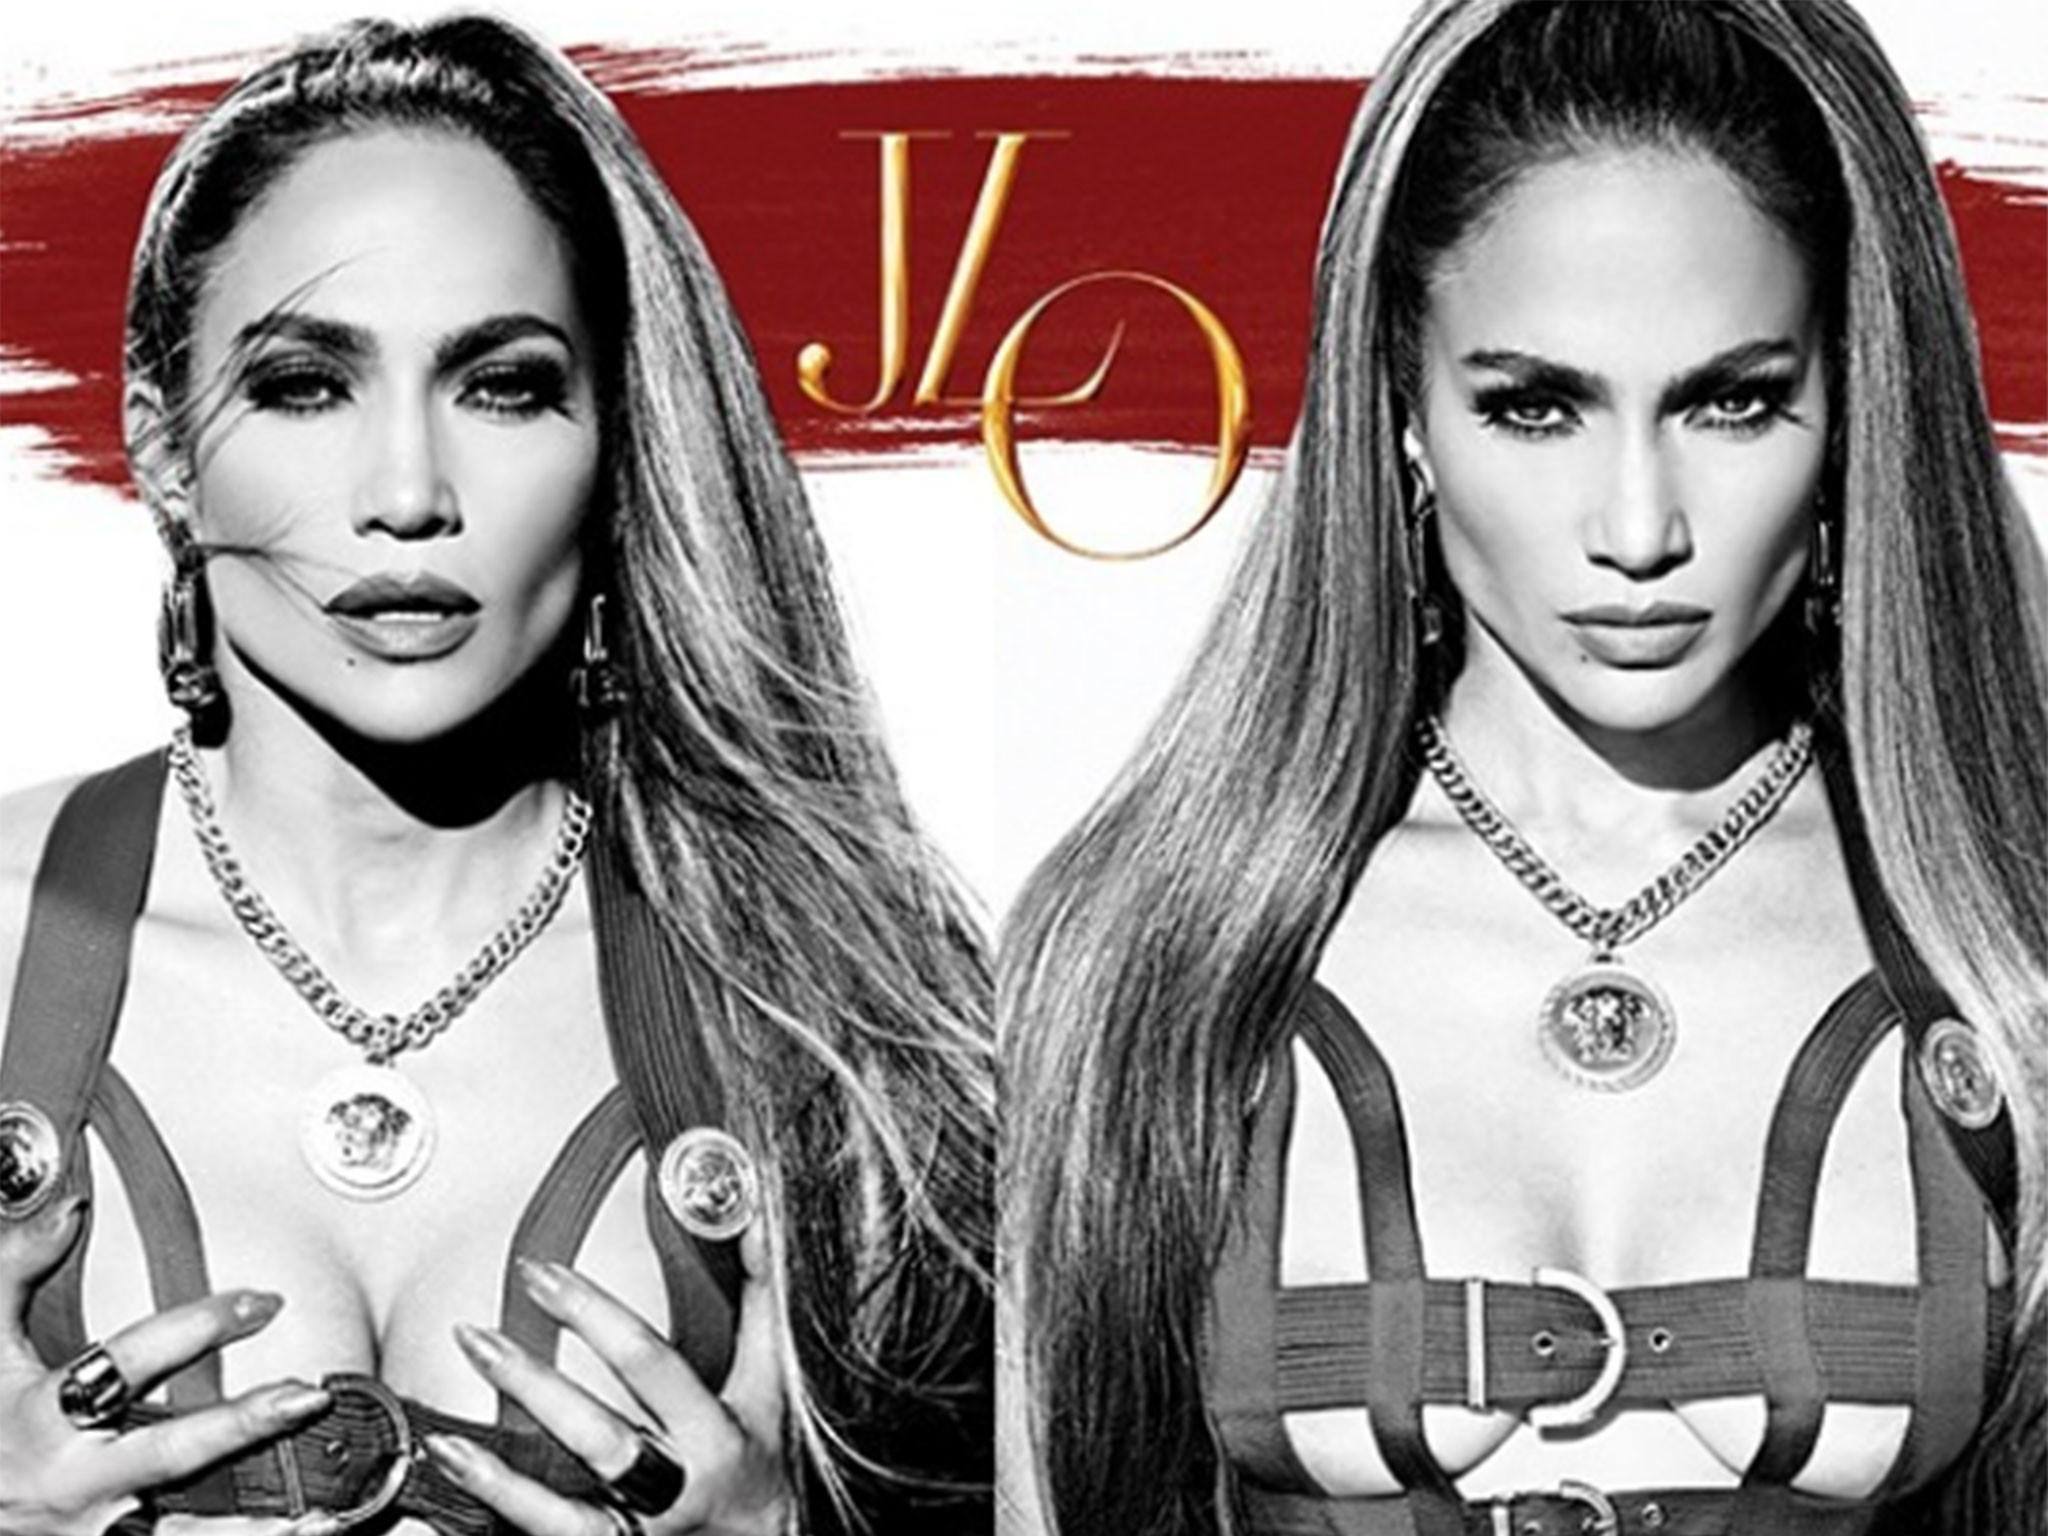 2048x1536 World Cup 2014 opening ceremony: Jennifer Lopez shares new album artwork |  The Independent